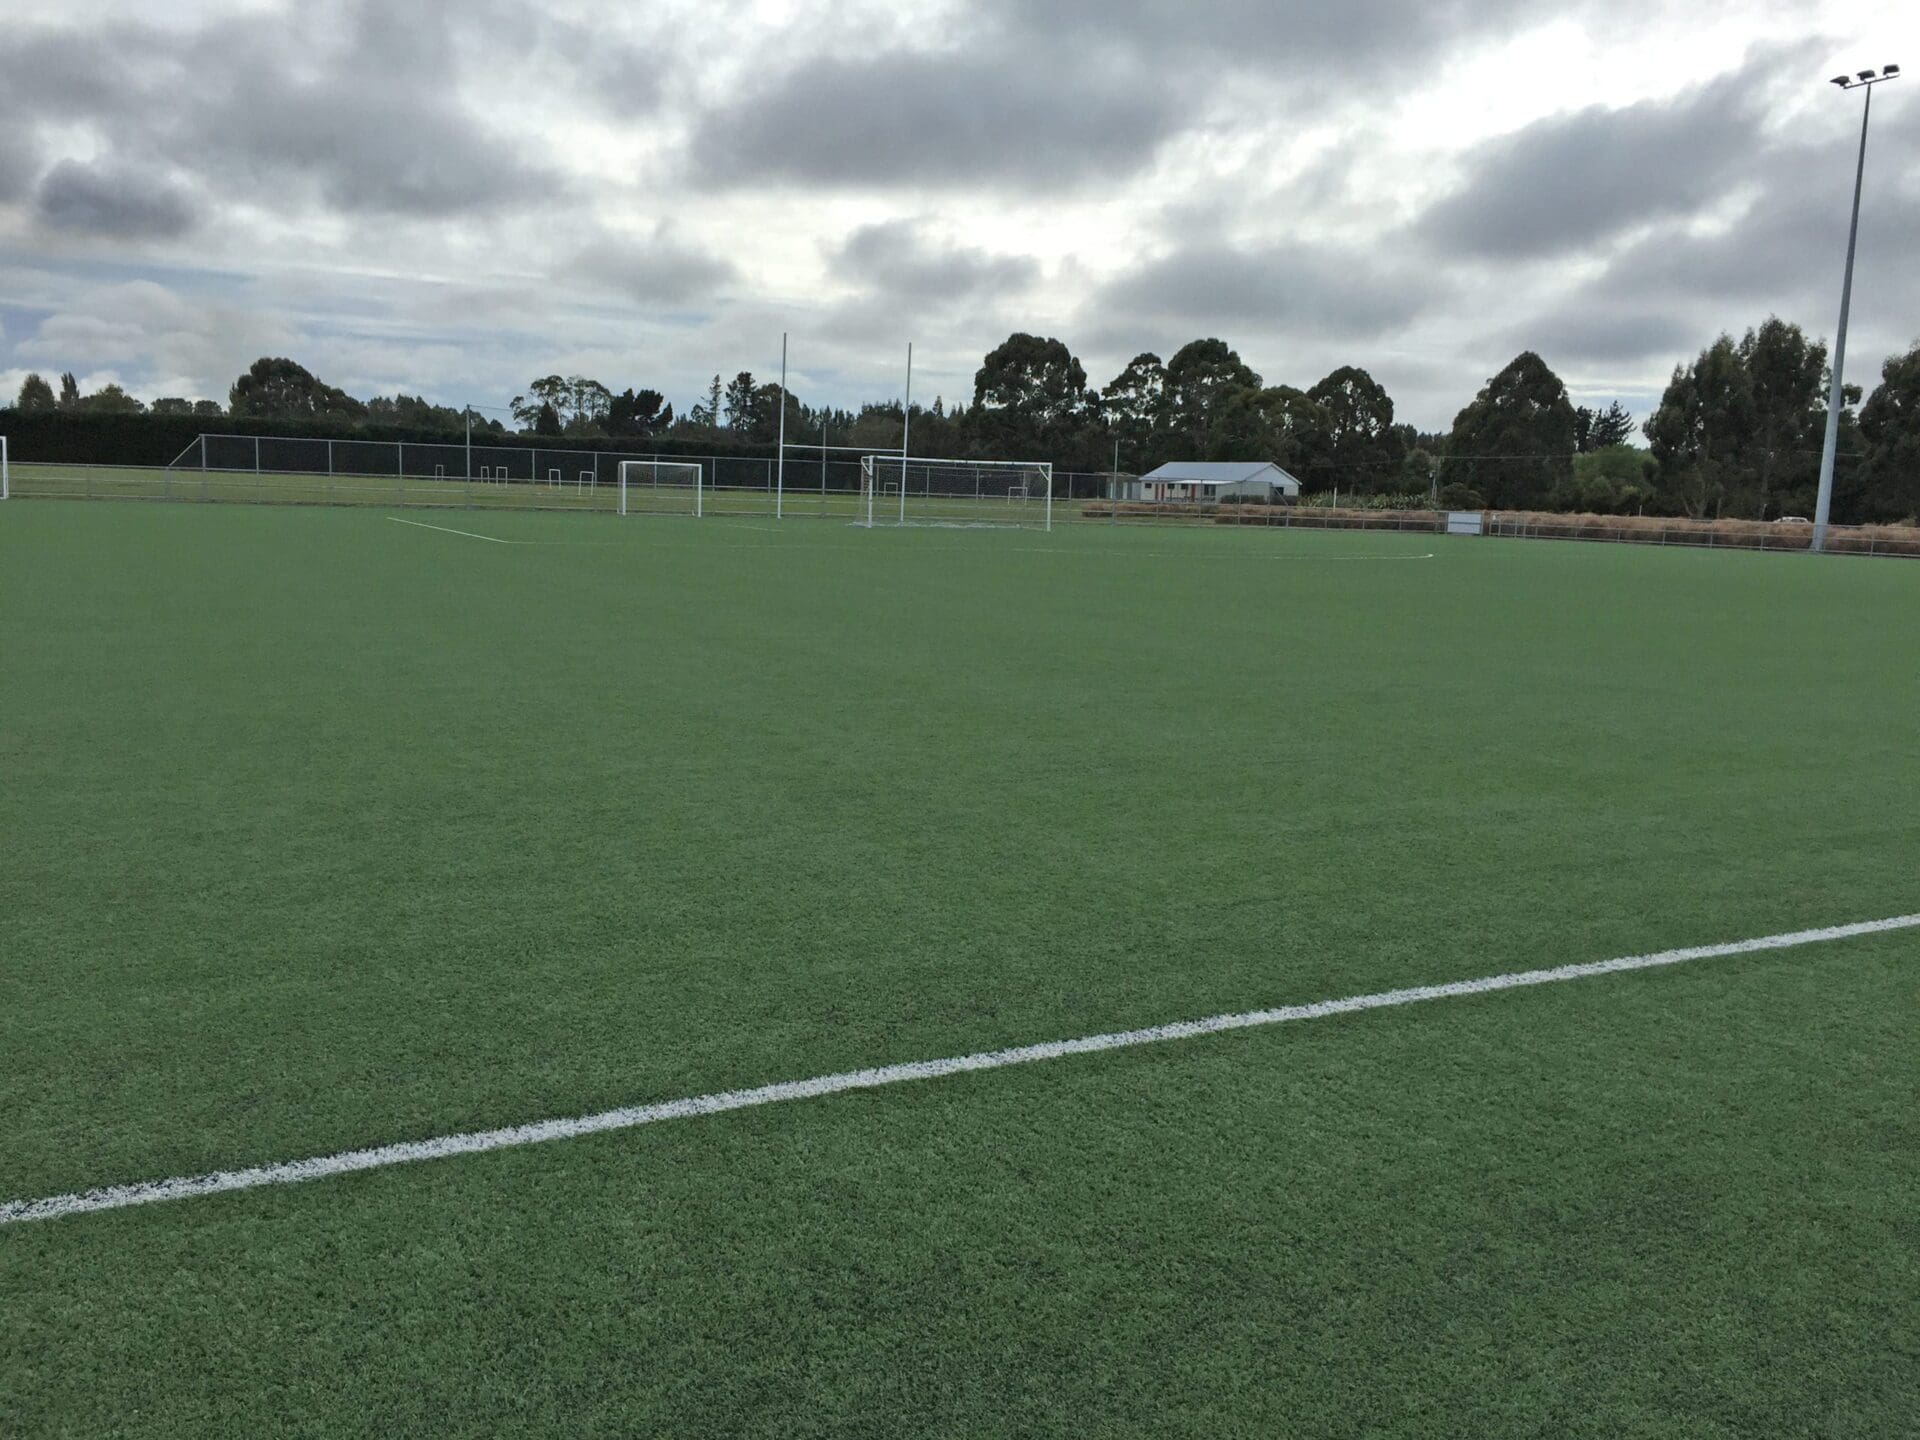 This synthetic turf system will support play regardless of the weather